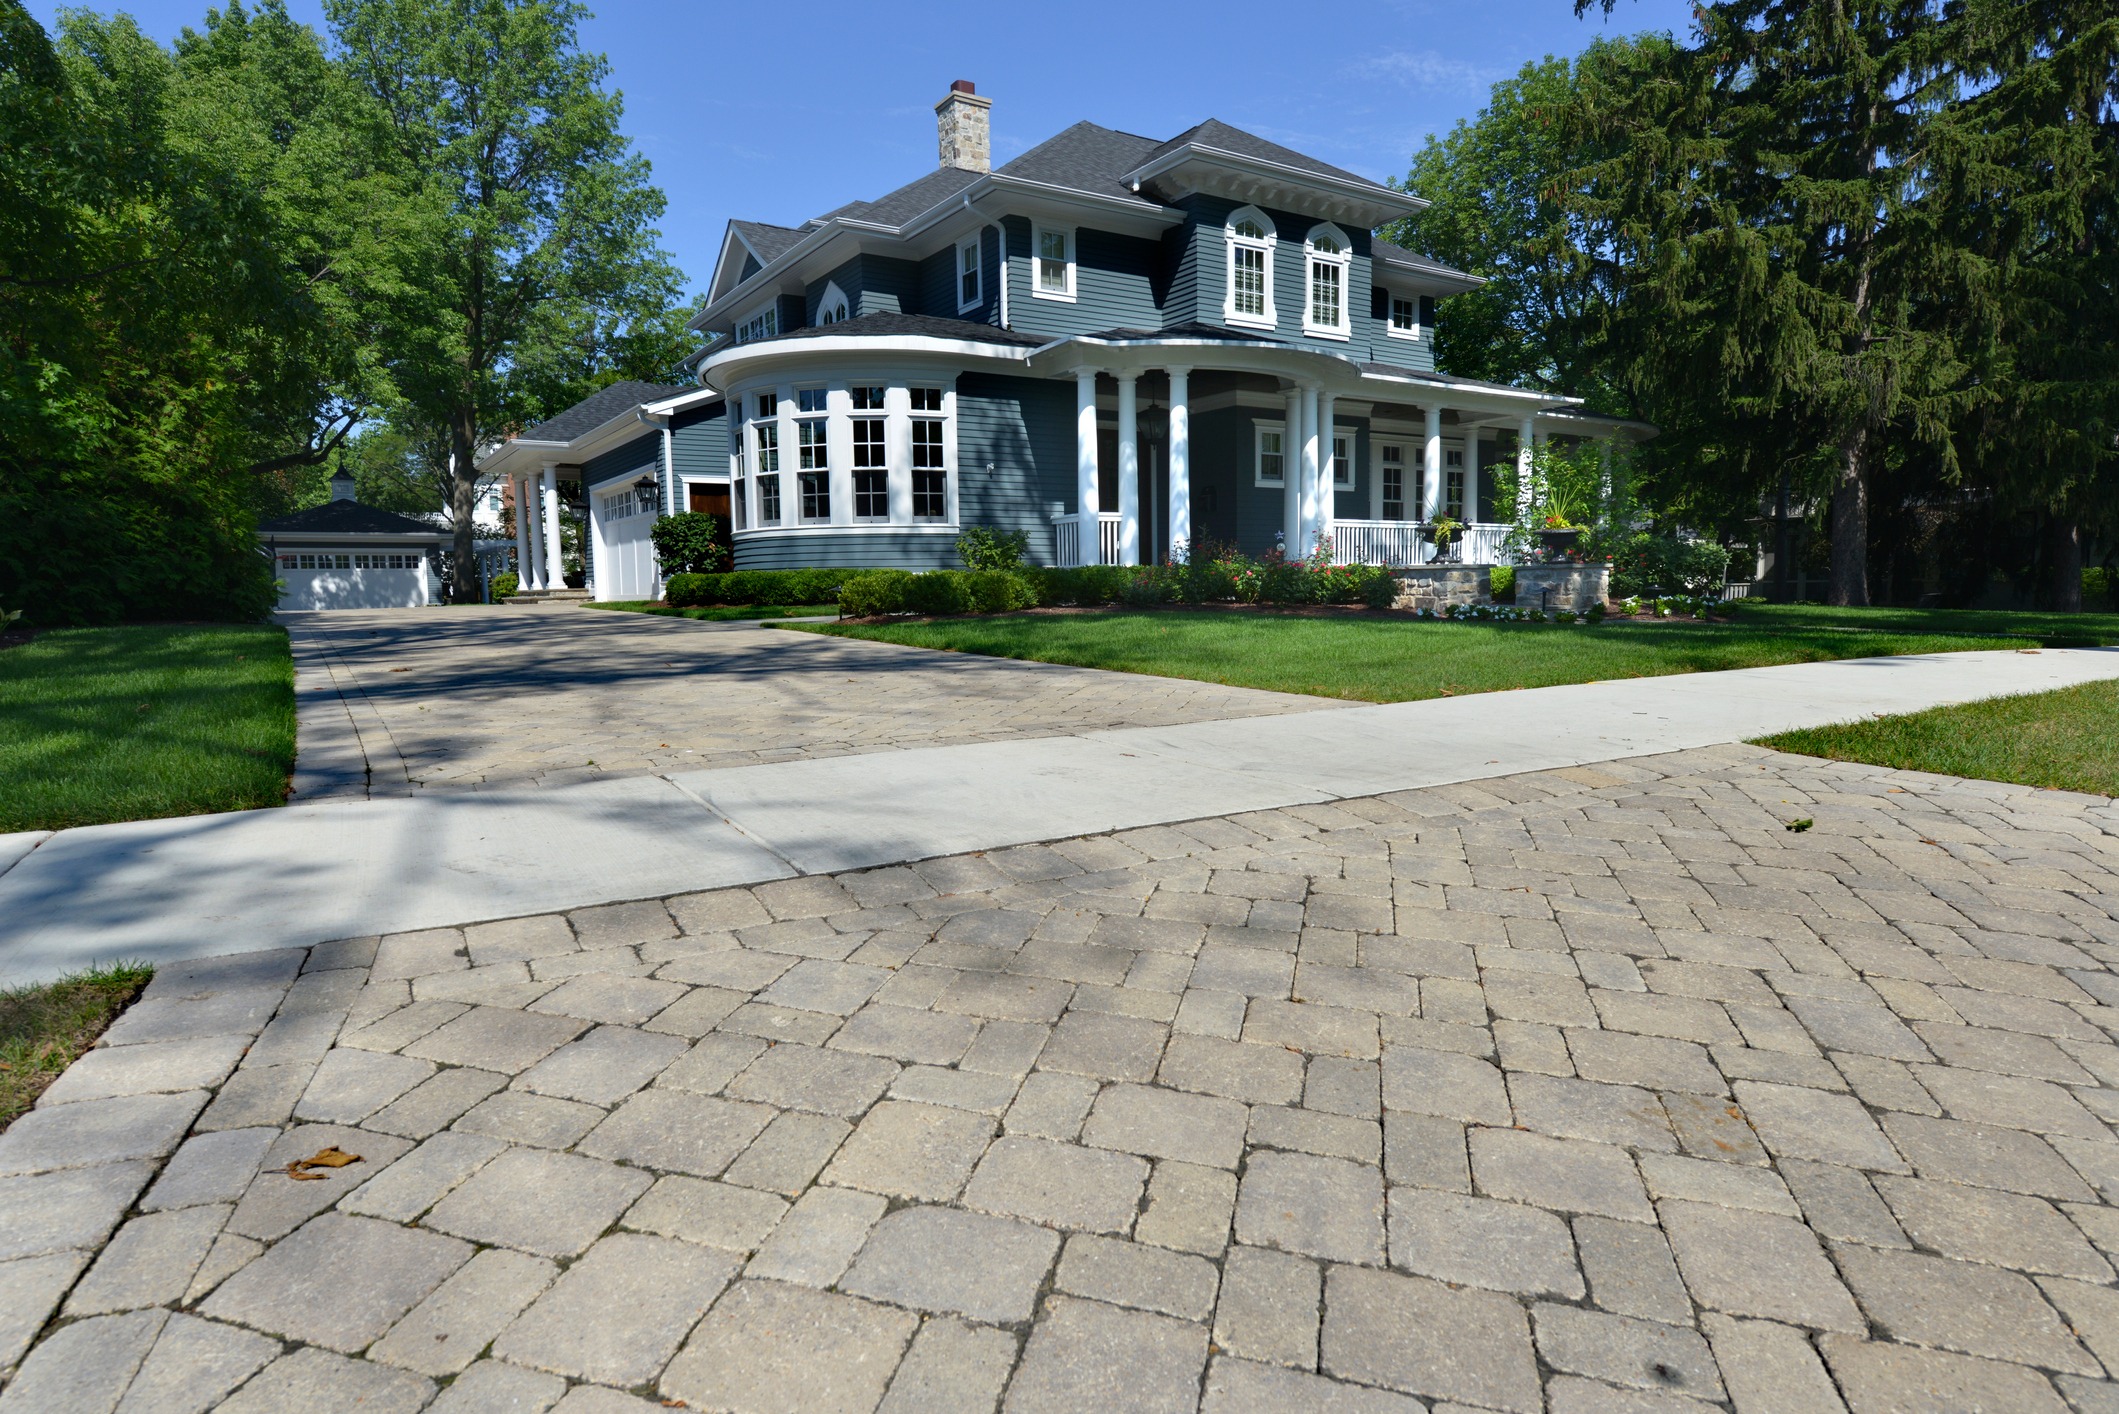 Large blue house on a lot with a long pavers driveway